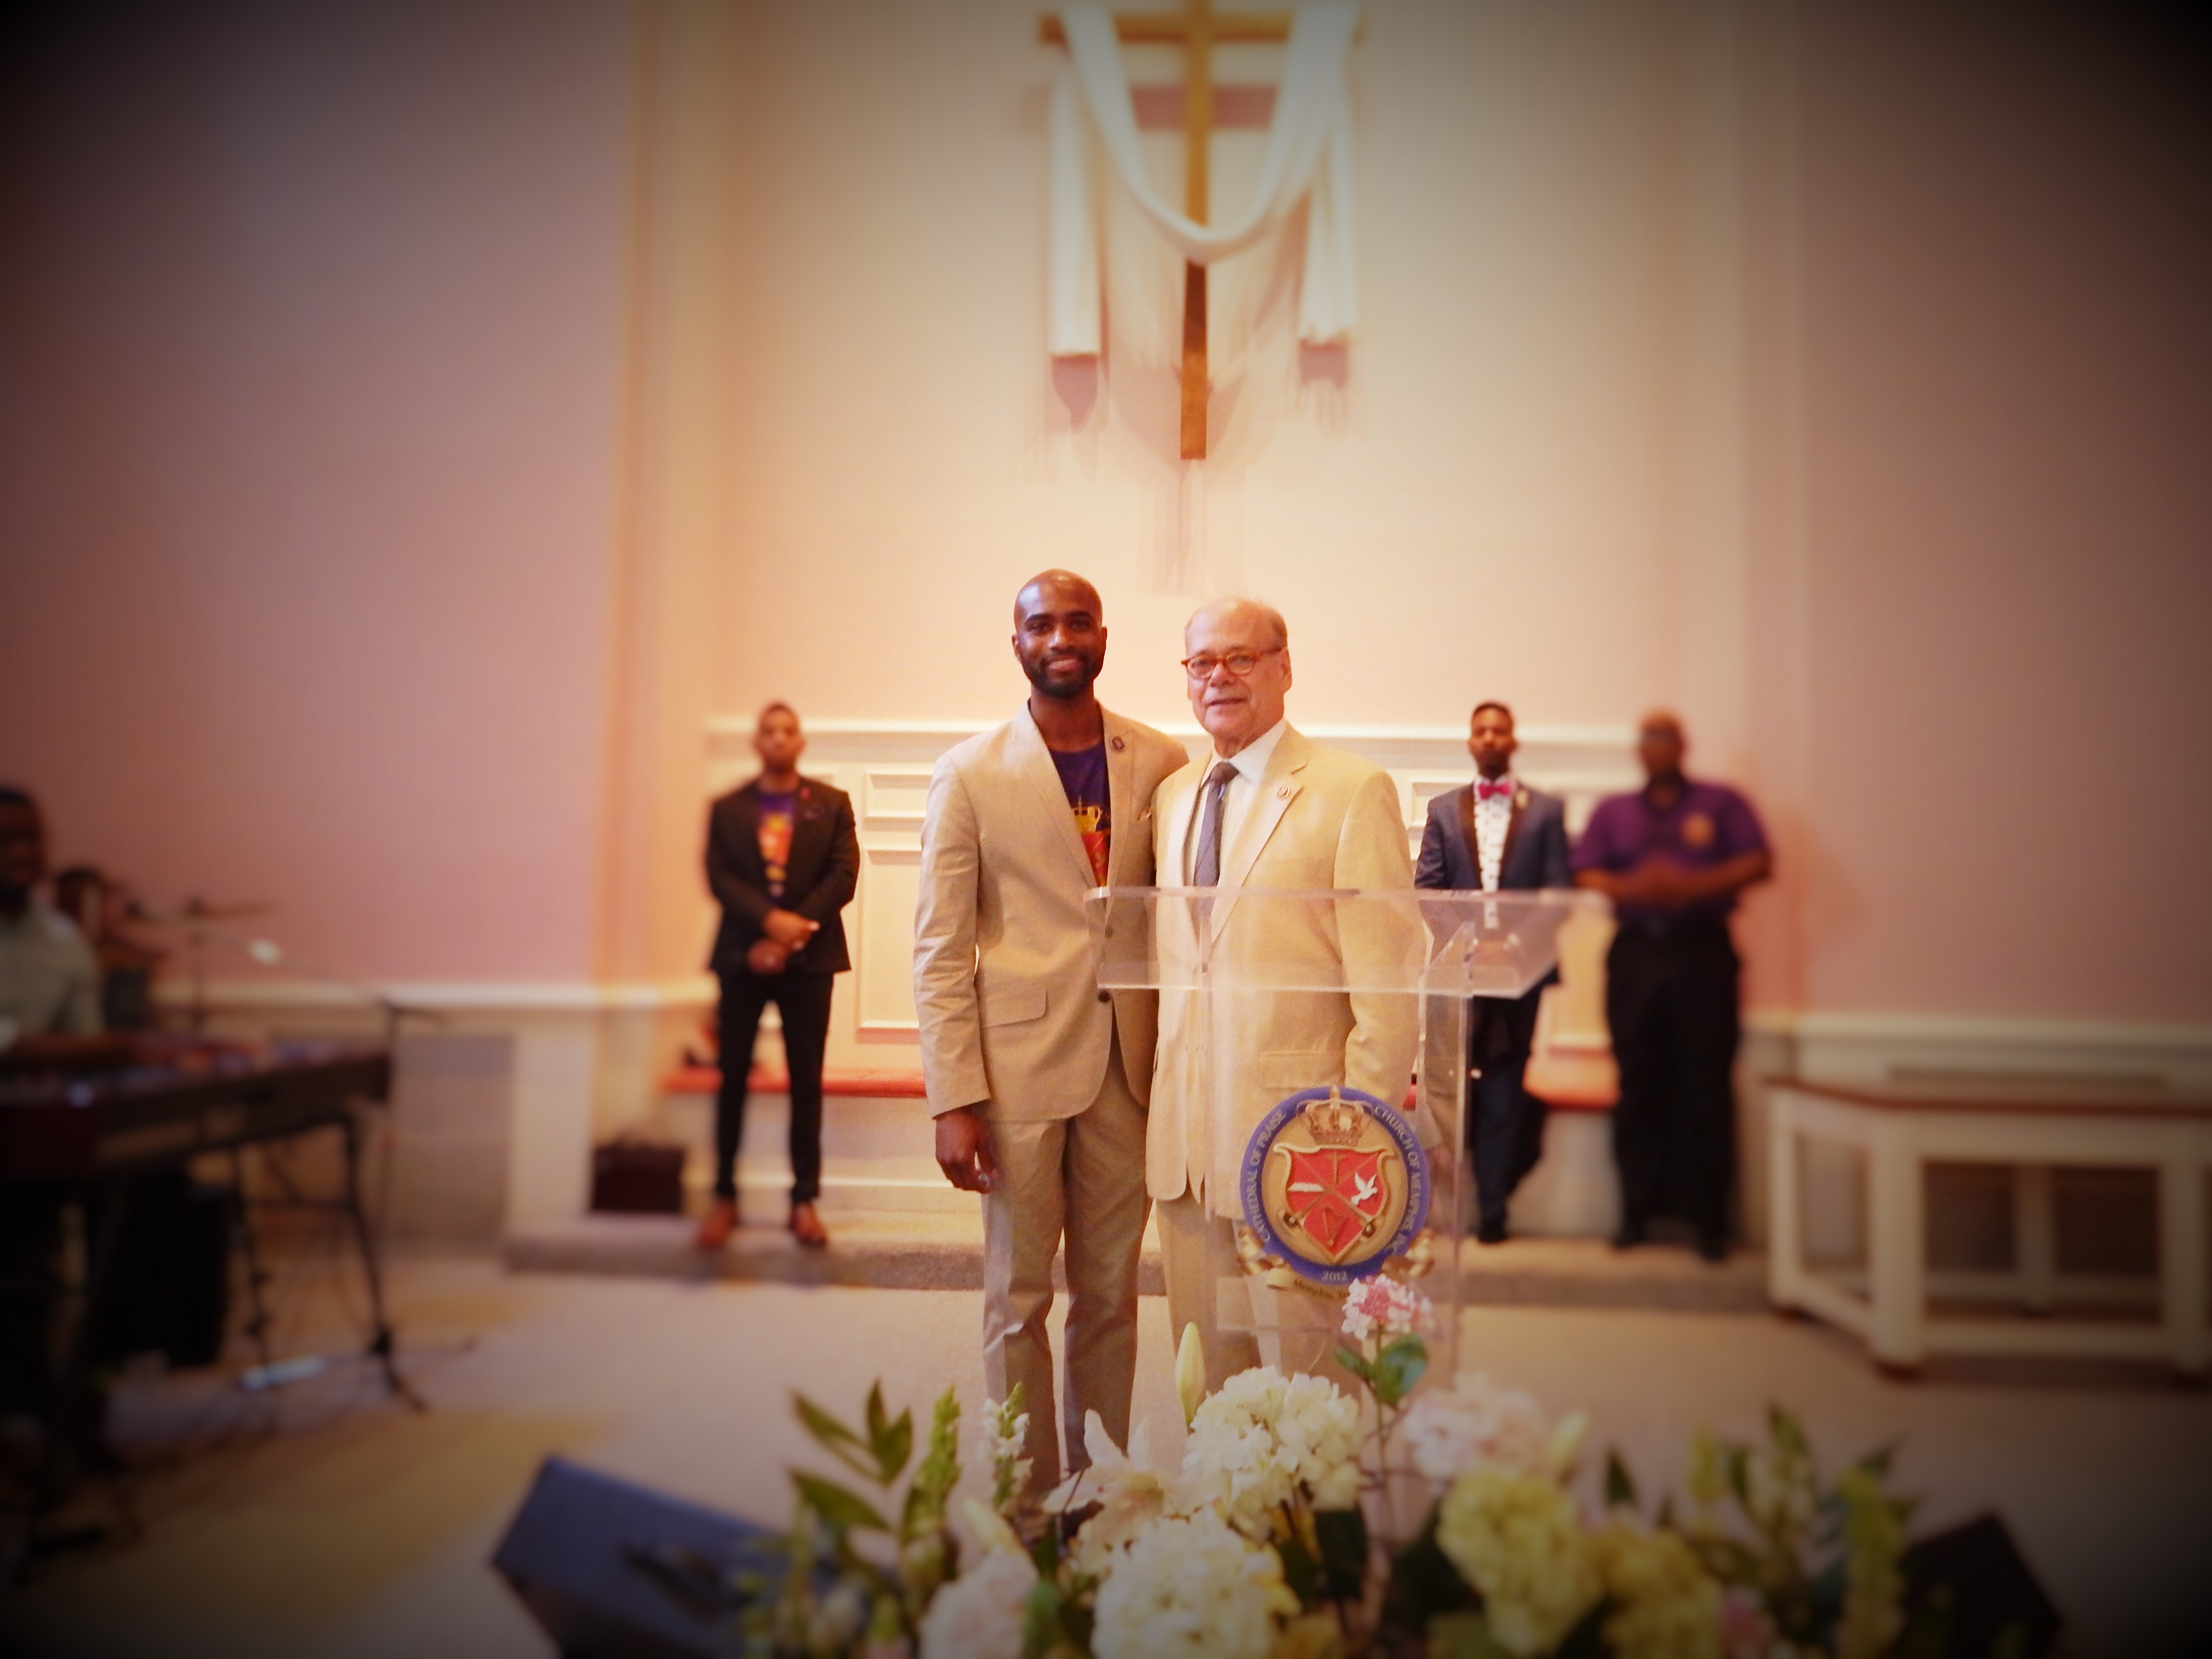 Pastor Gooch and 9th District State Representative Steve Cohen